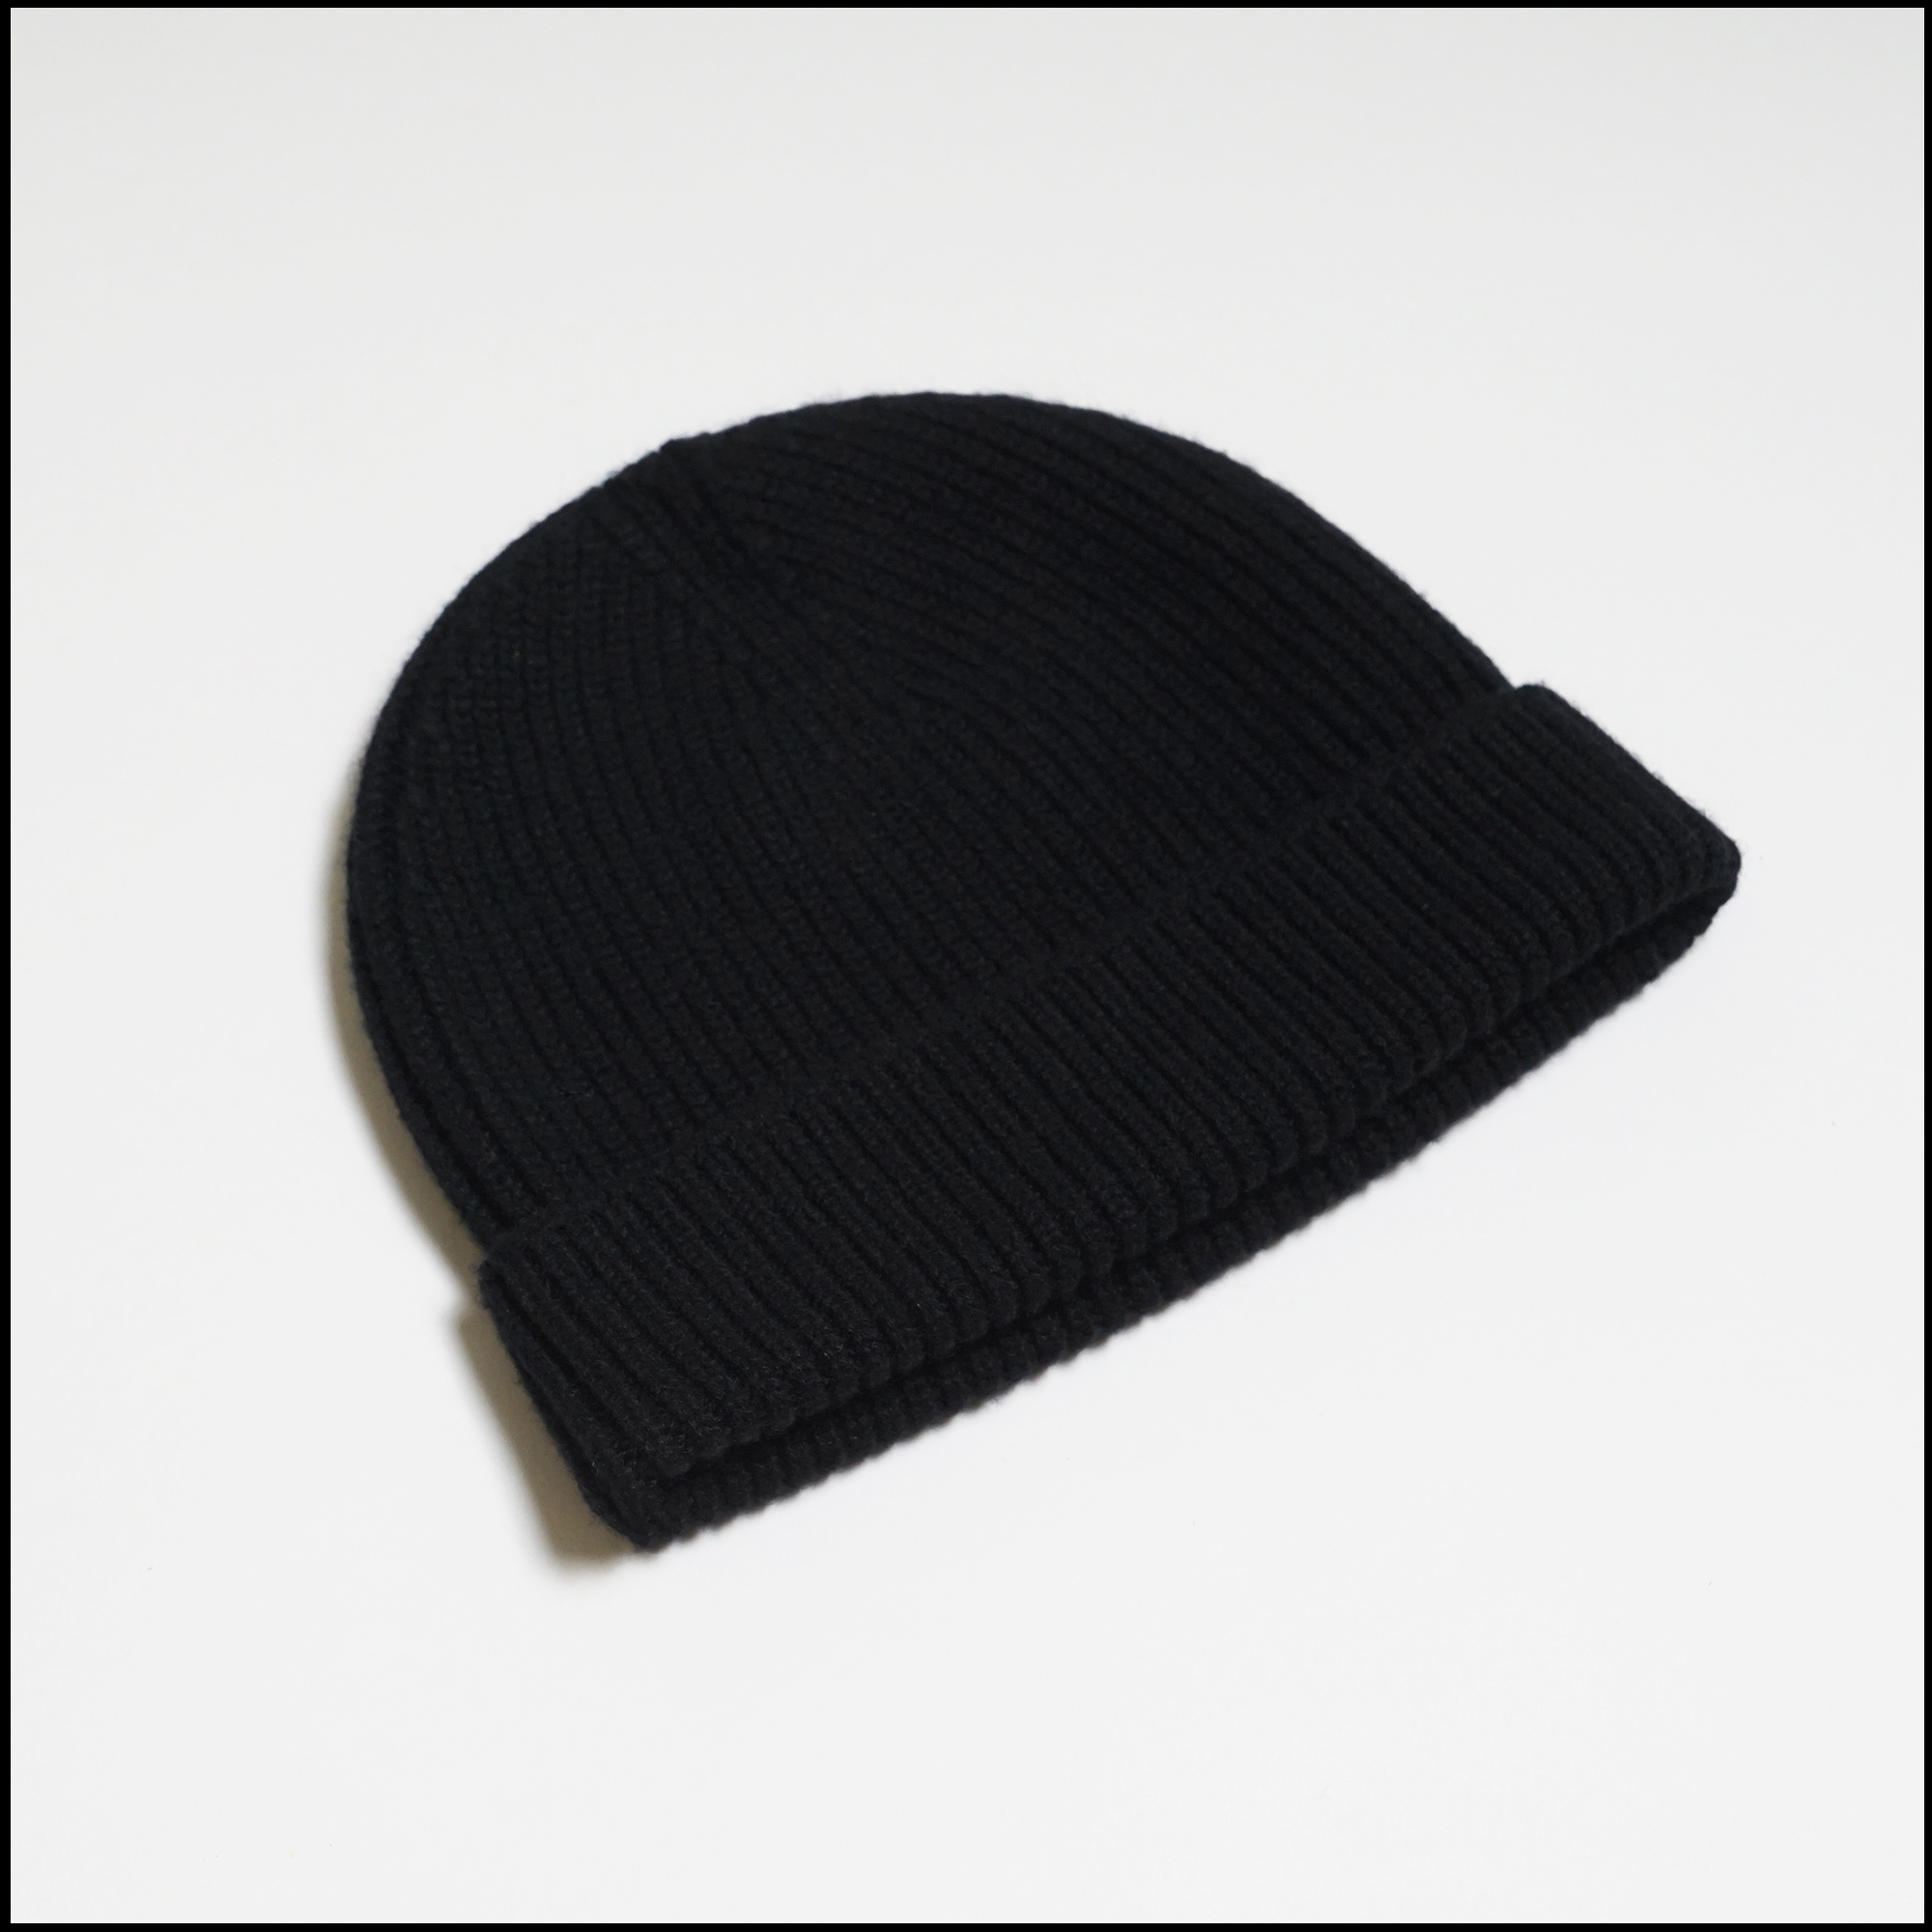 Night Beanie in Black color by Arpenteur for C'H'C'M'